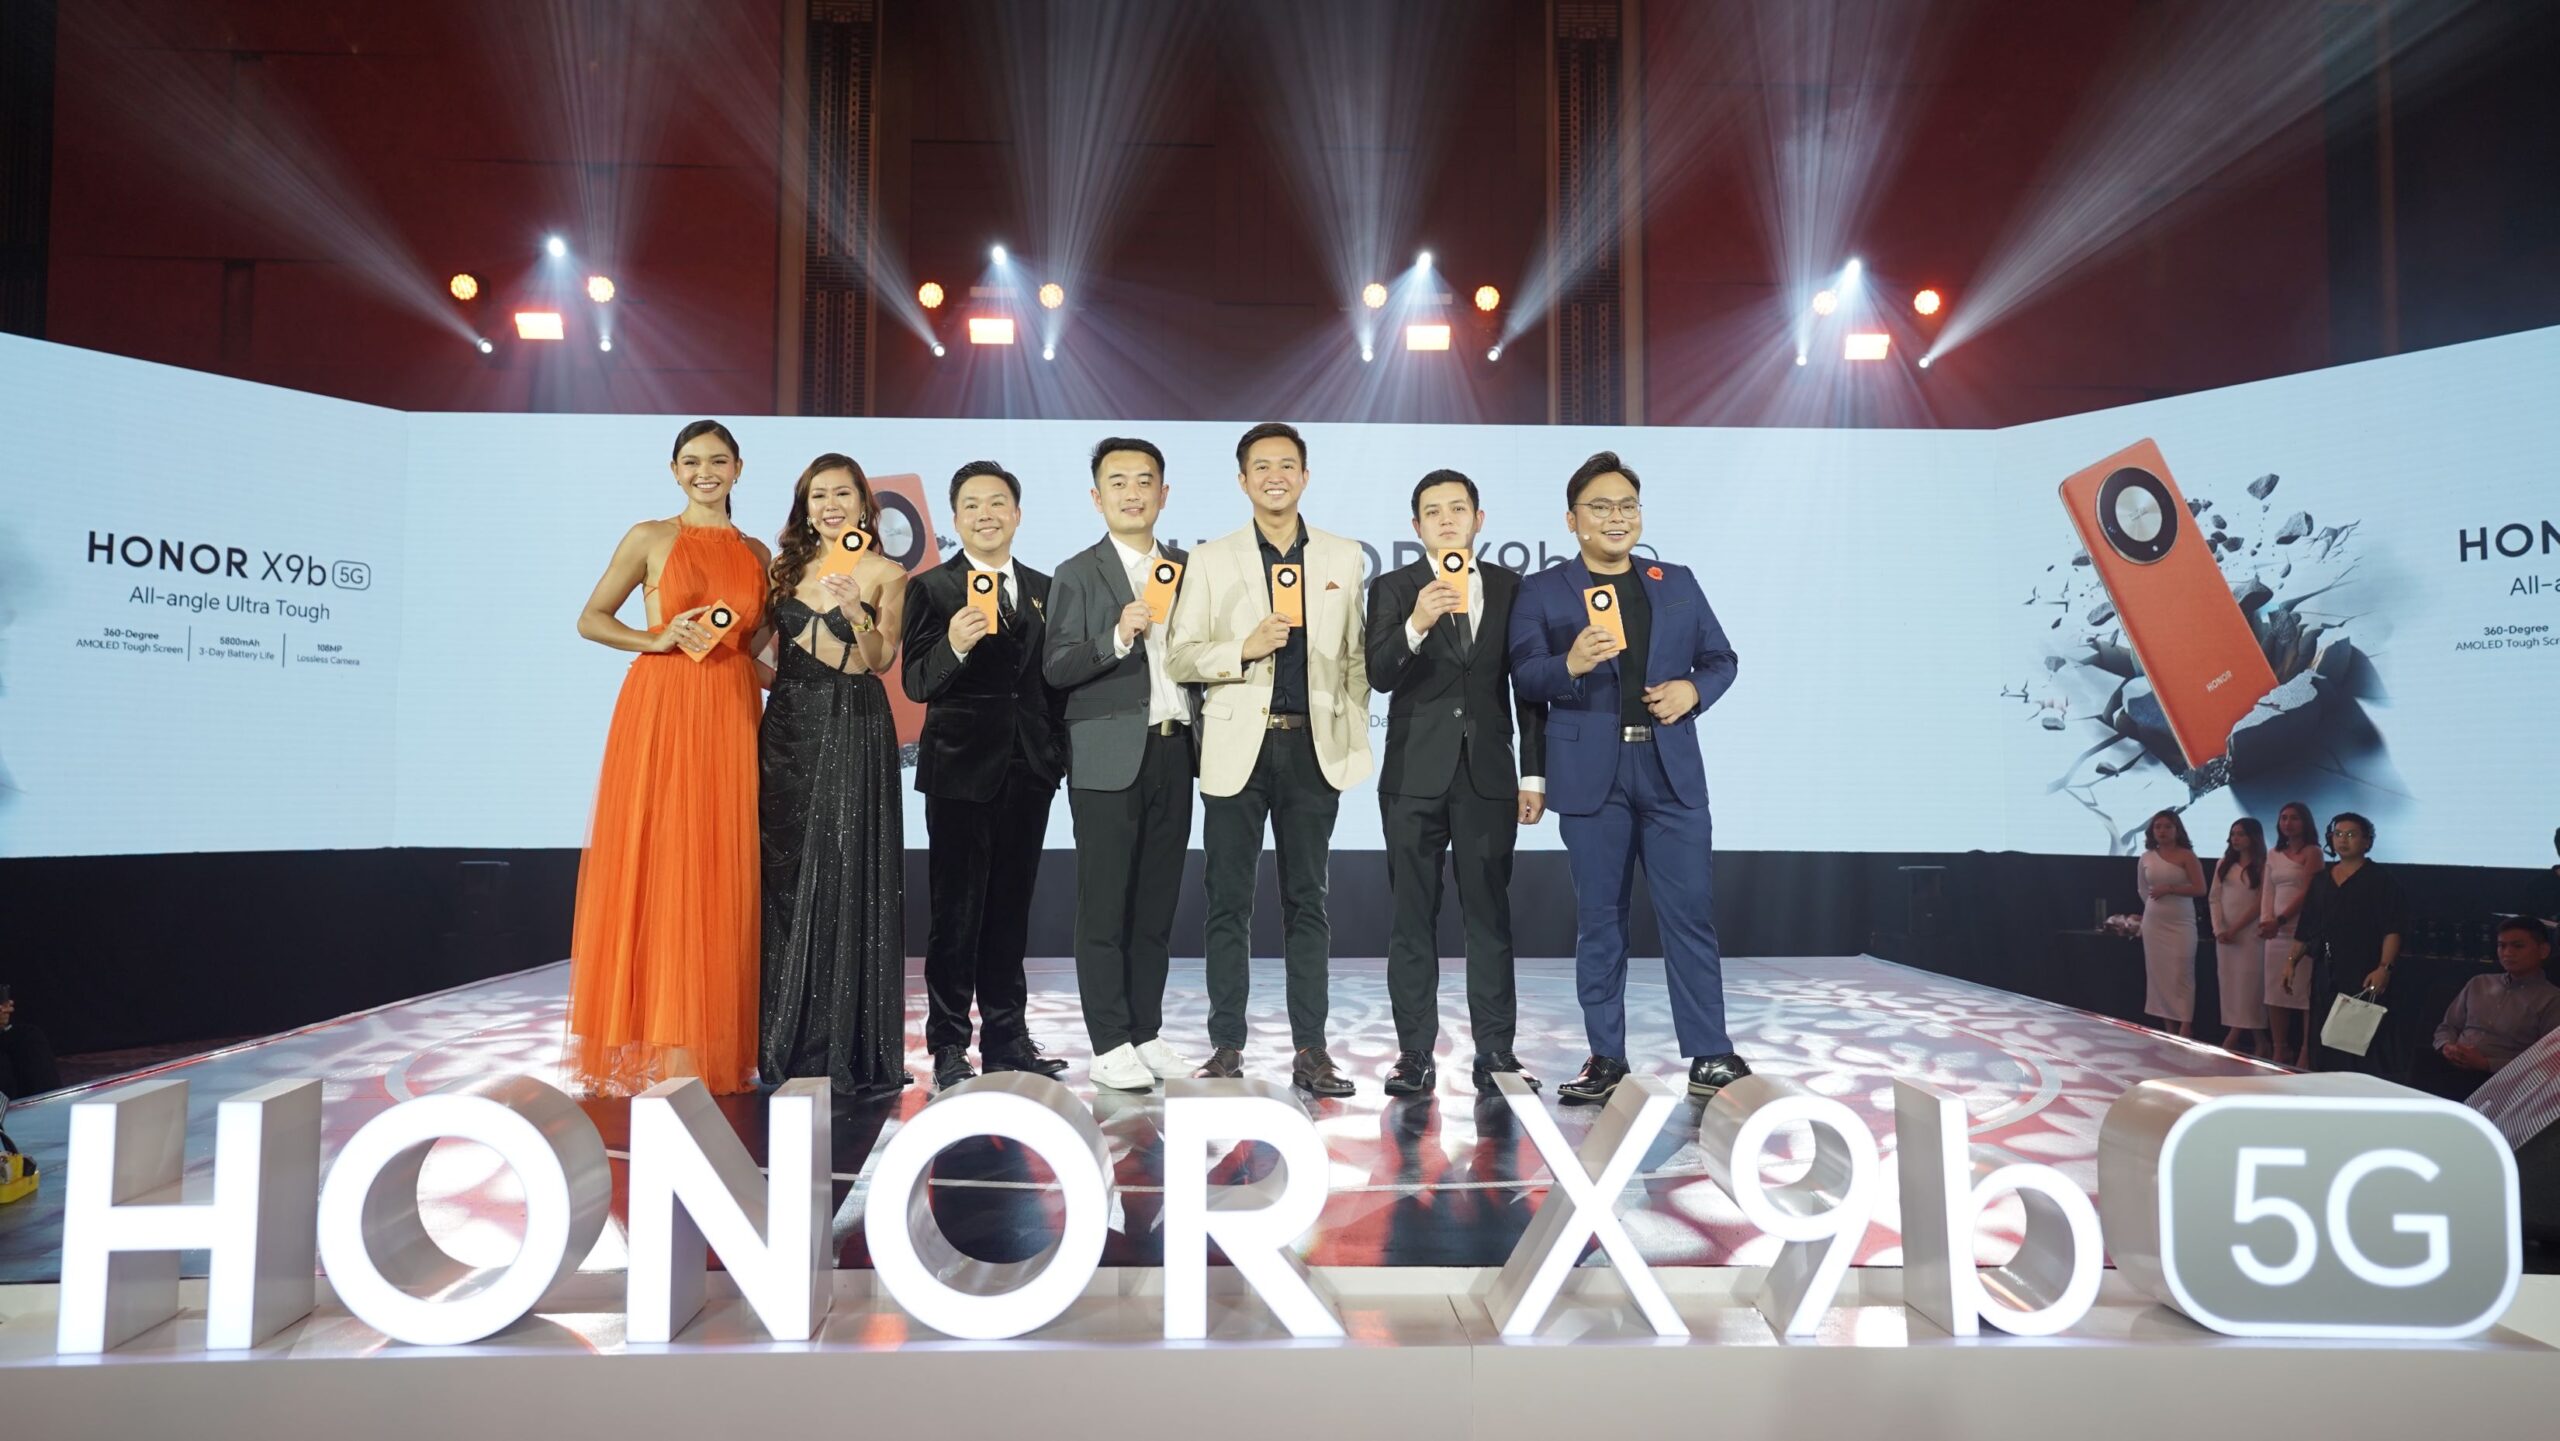 Miss Philippines Pauline Amelinckx with HONOR Philippines Brand Marketing Manager Joepy Libo-on, PR Manager Pao Oga, GTM Manager Steven Yan, Vice President Stephen Cheng, National Sales Head Blake Garcia, and National Training Head Jaynard Lamarca